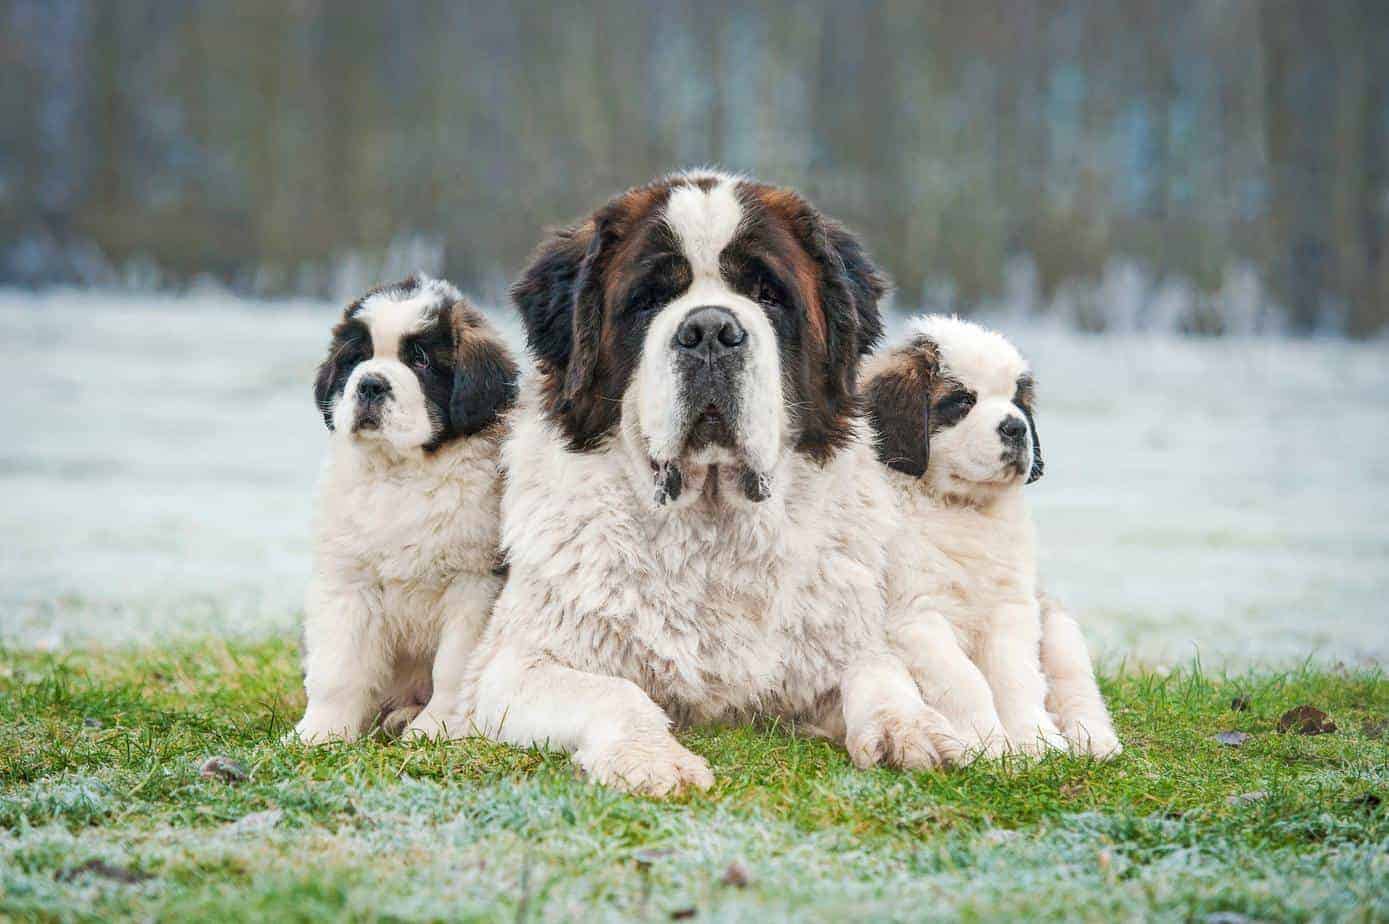 how did st bernard dogs help save lives in the swiss alps and how did the rescue dog get its name